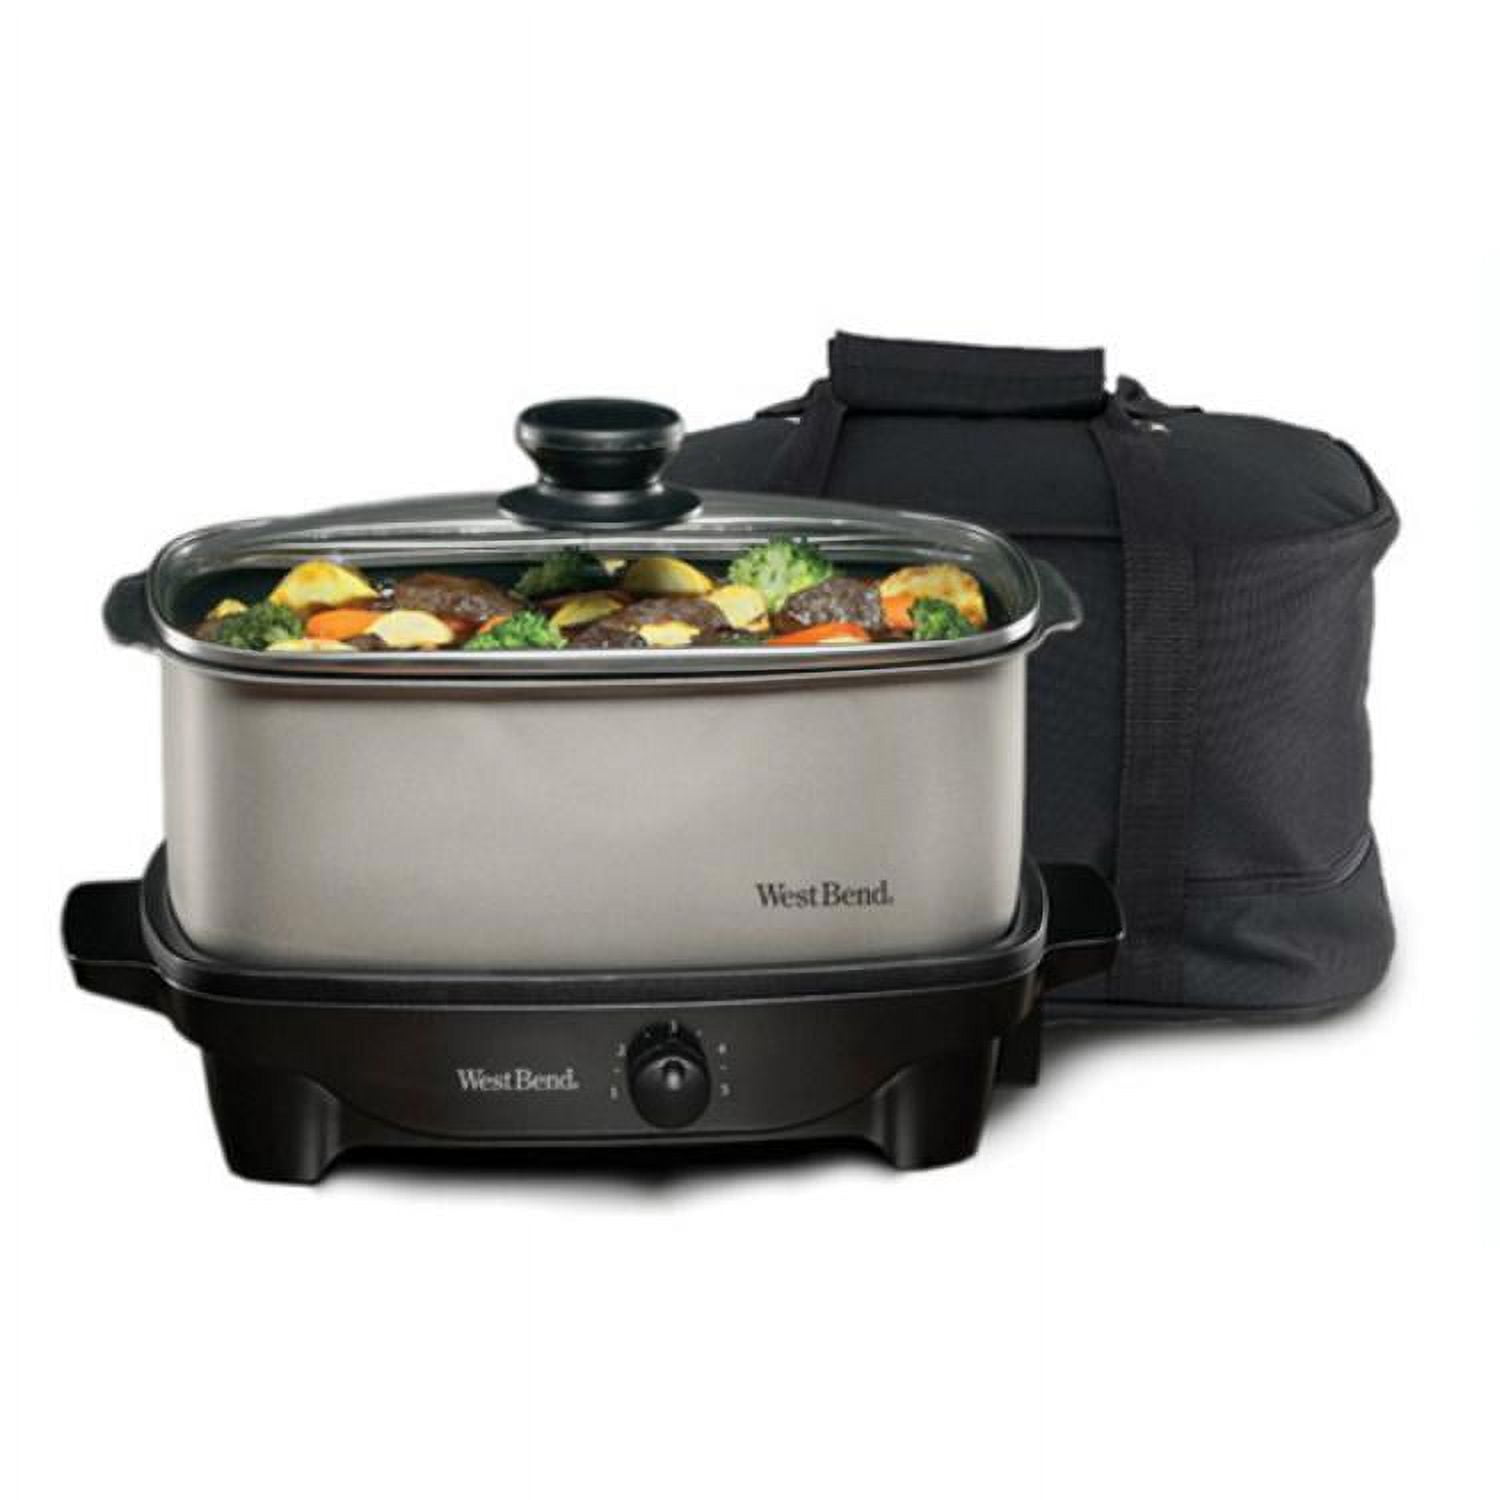 This $15 Slow Cooker Has More Than 15,700 Five-Star Ratings on